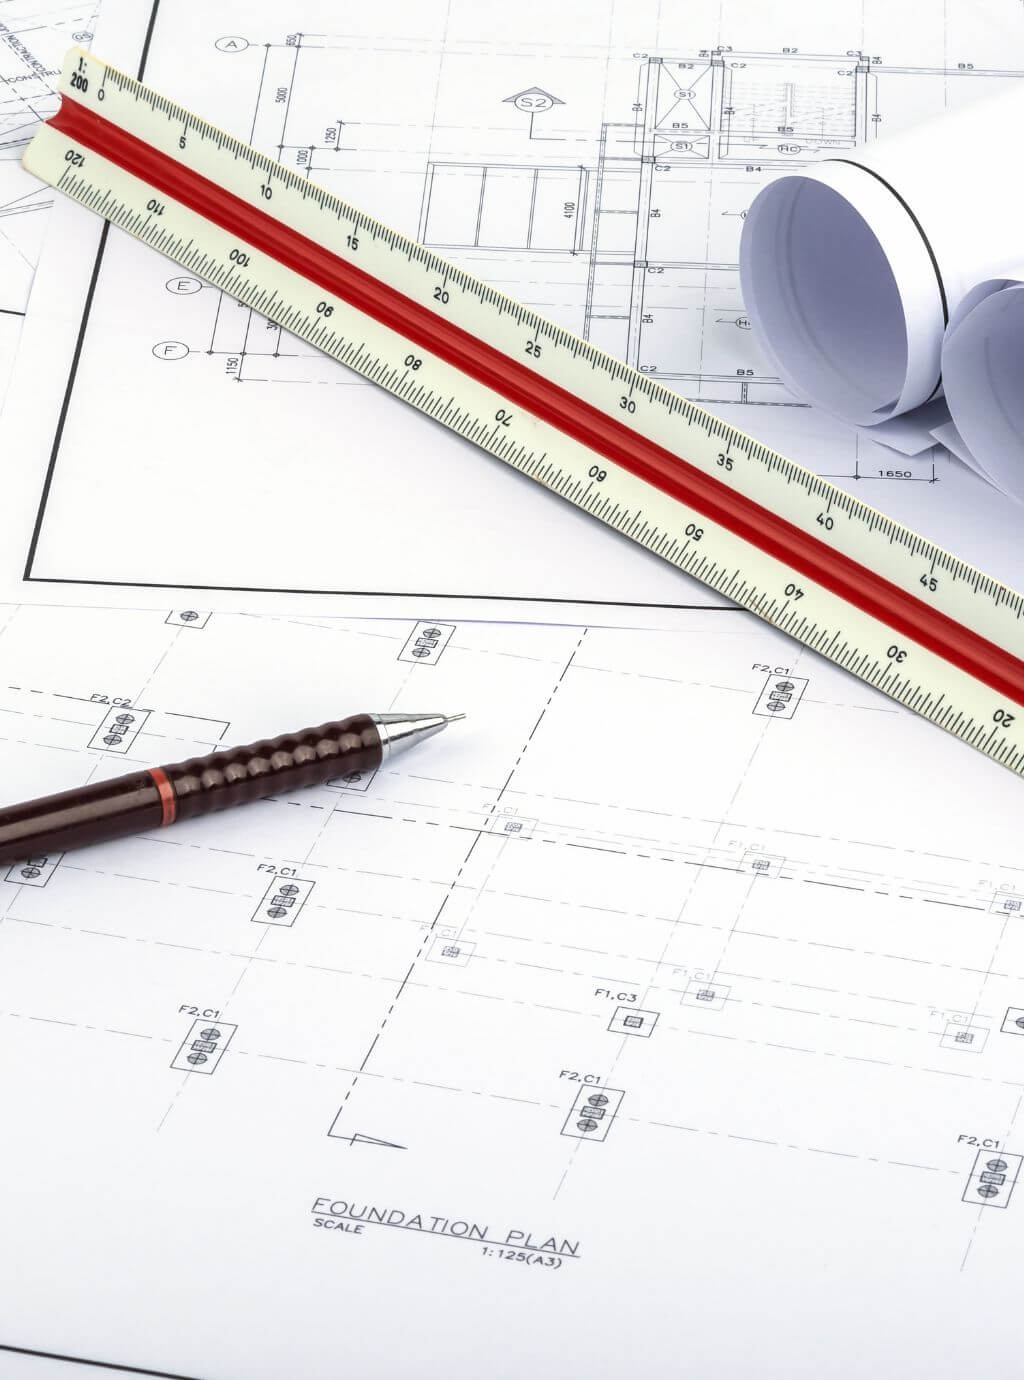 Blueprint of building foundation with precise measurements and structural details.